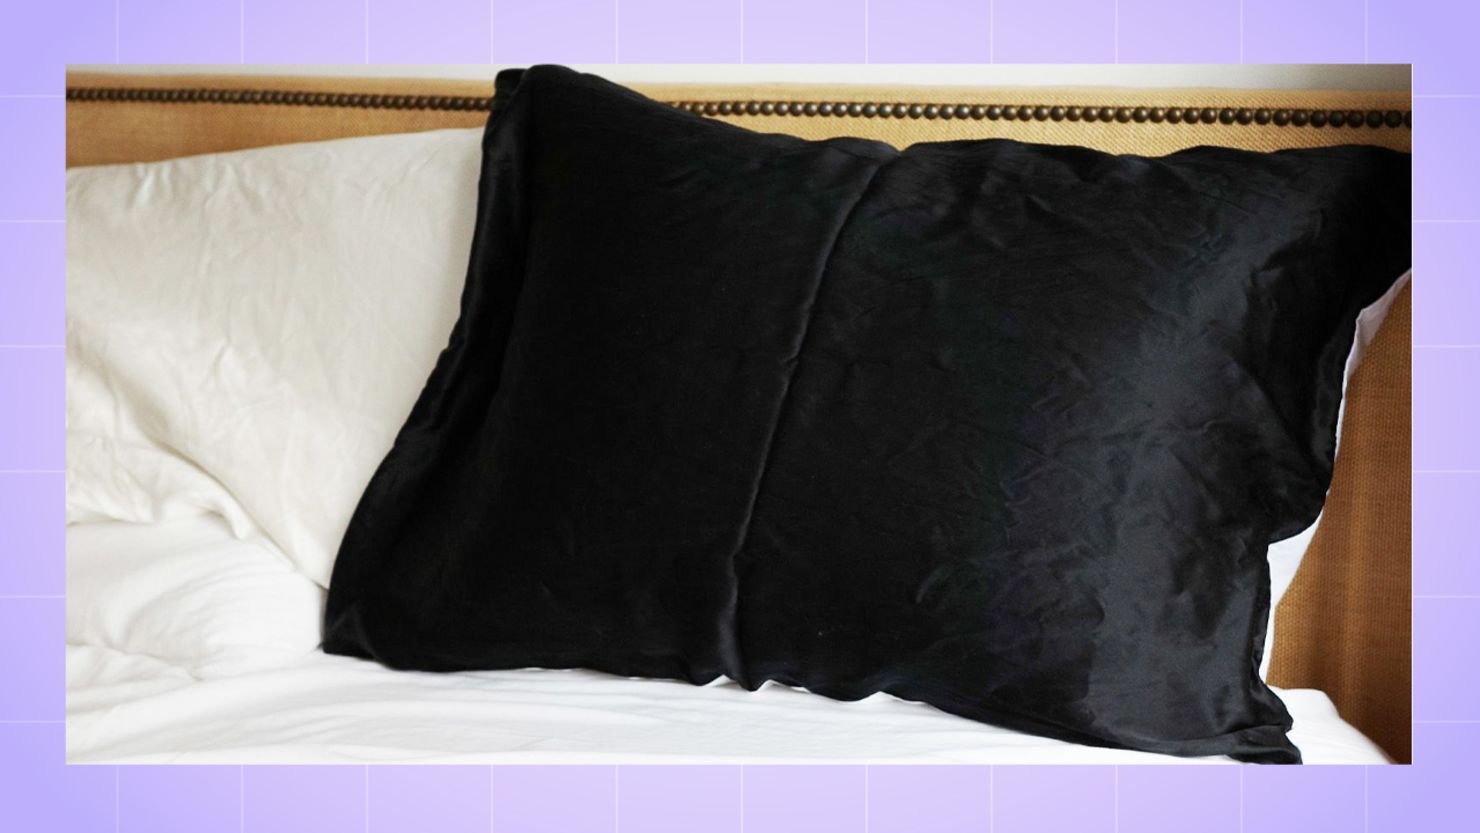 MYK silk pillowcases are 30% off on  for Black Friday